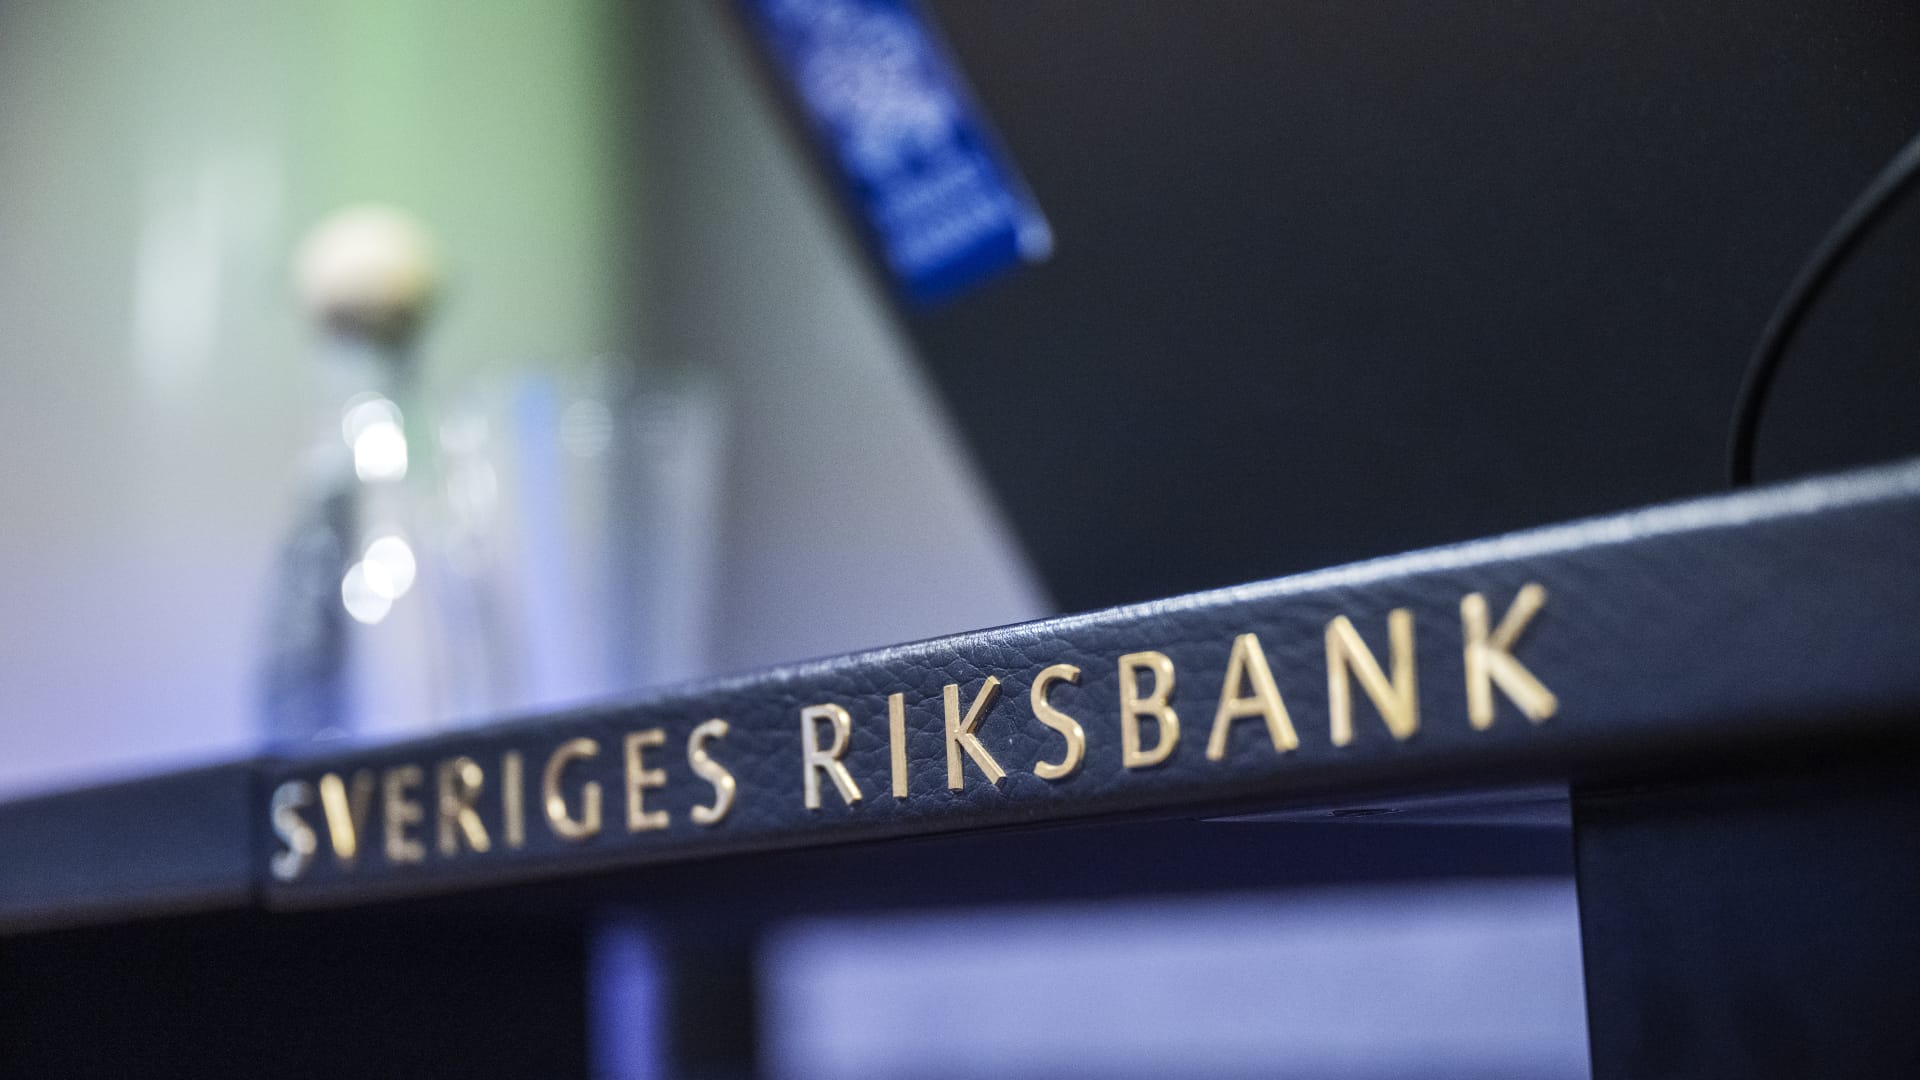 Sweden’s central bank launches 100 basis point rate hike says ‘inflation is too high’ – CNBC